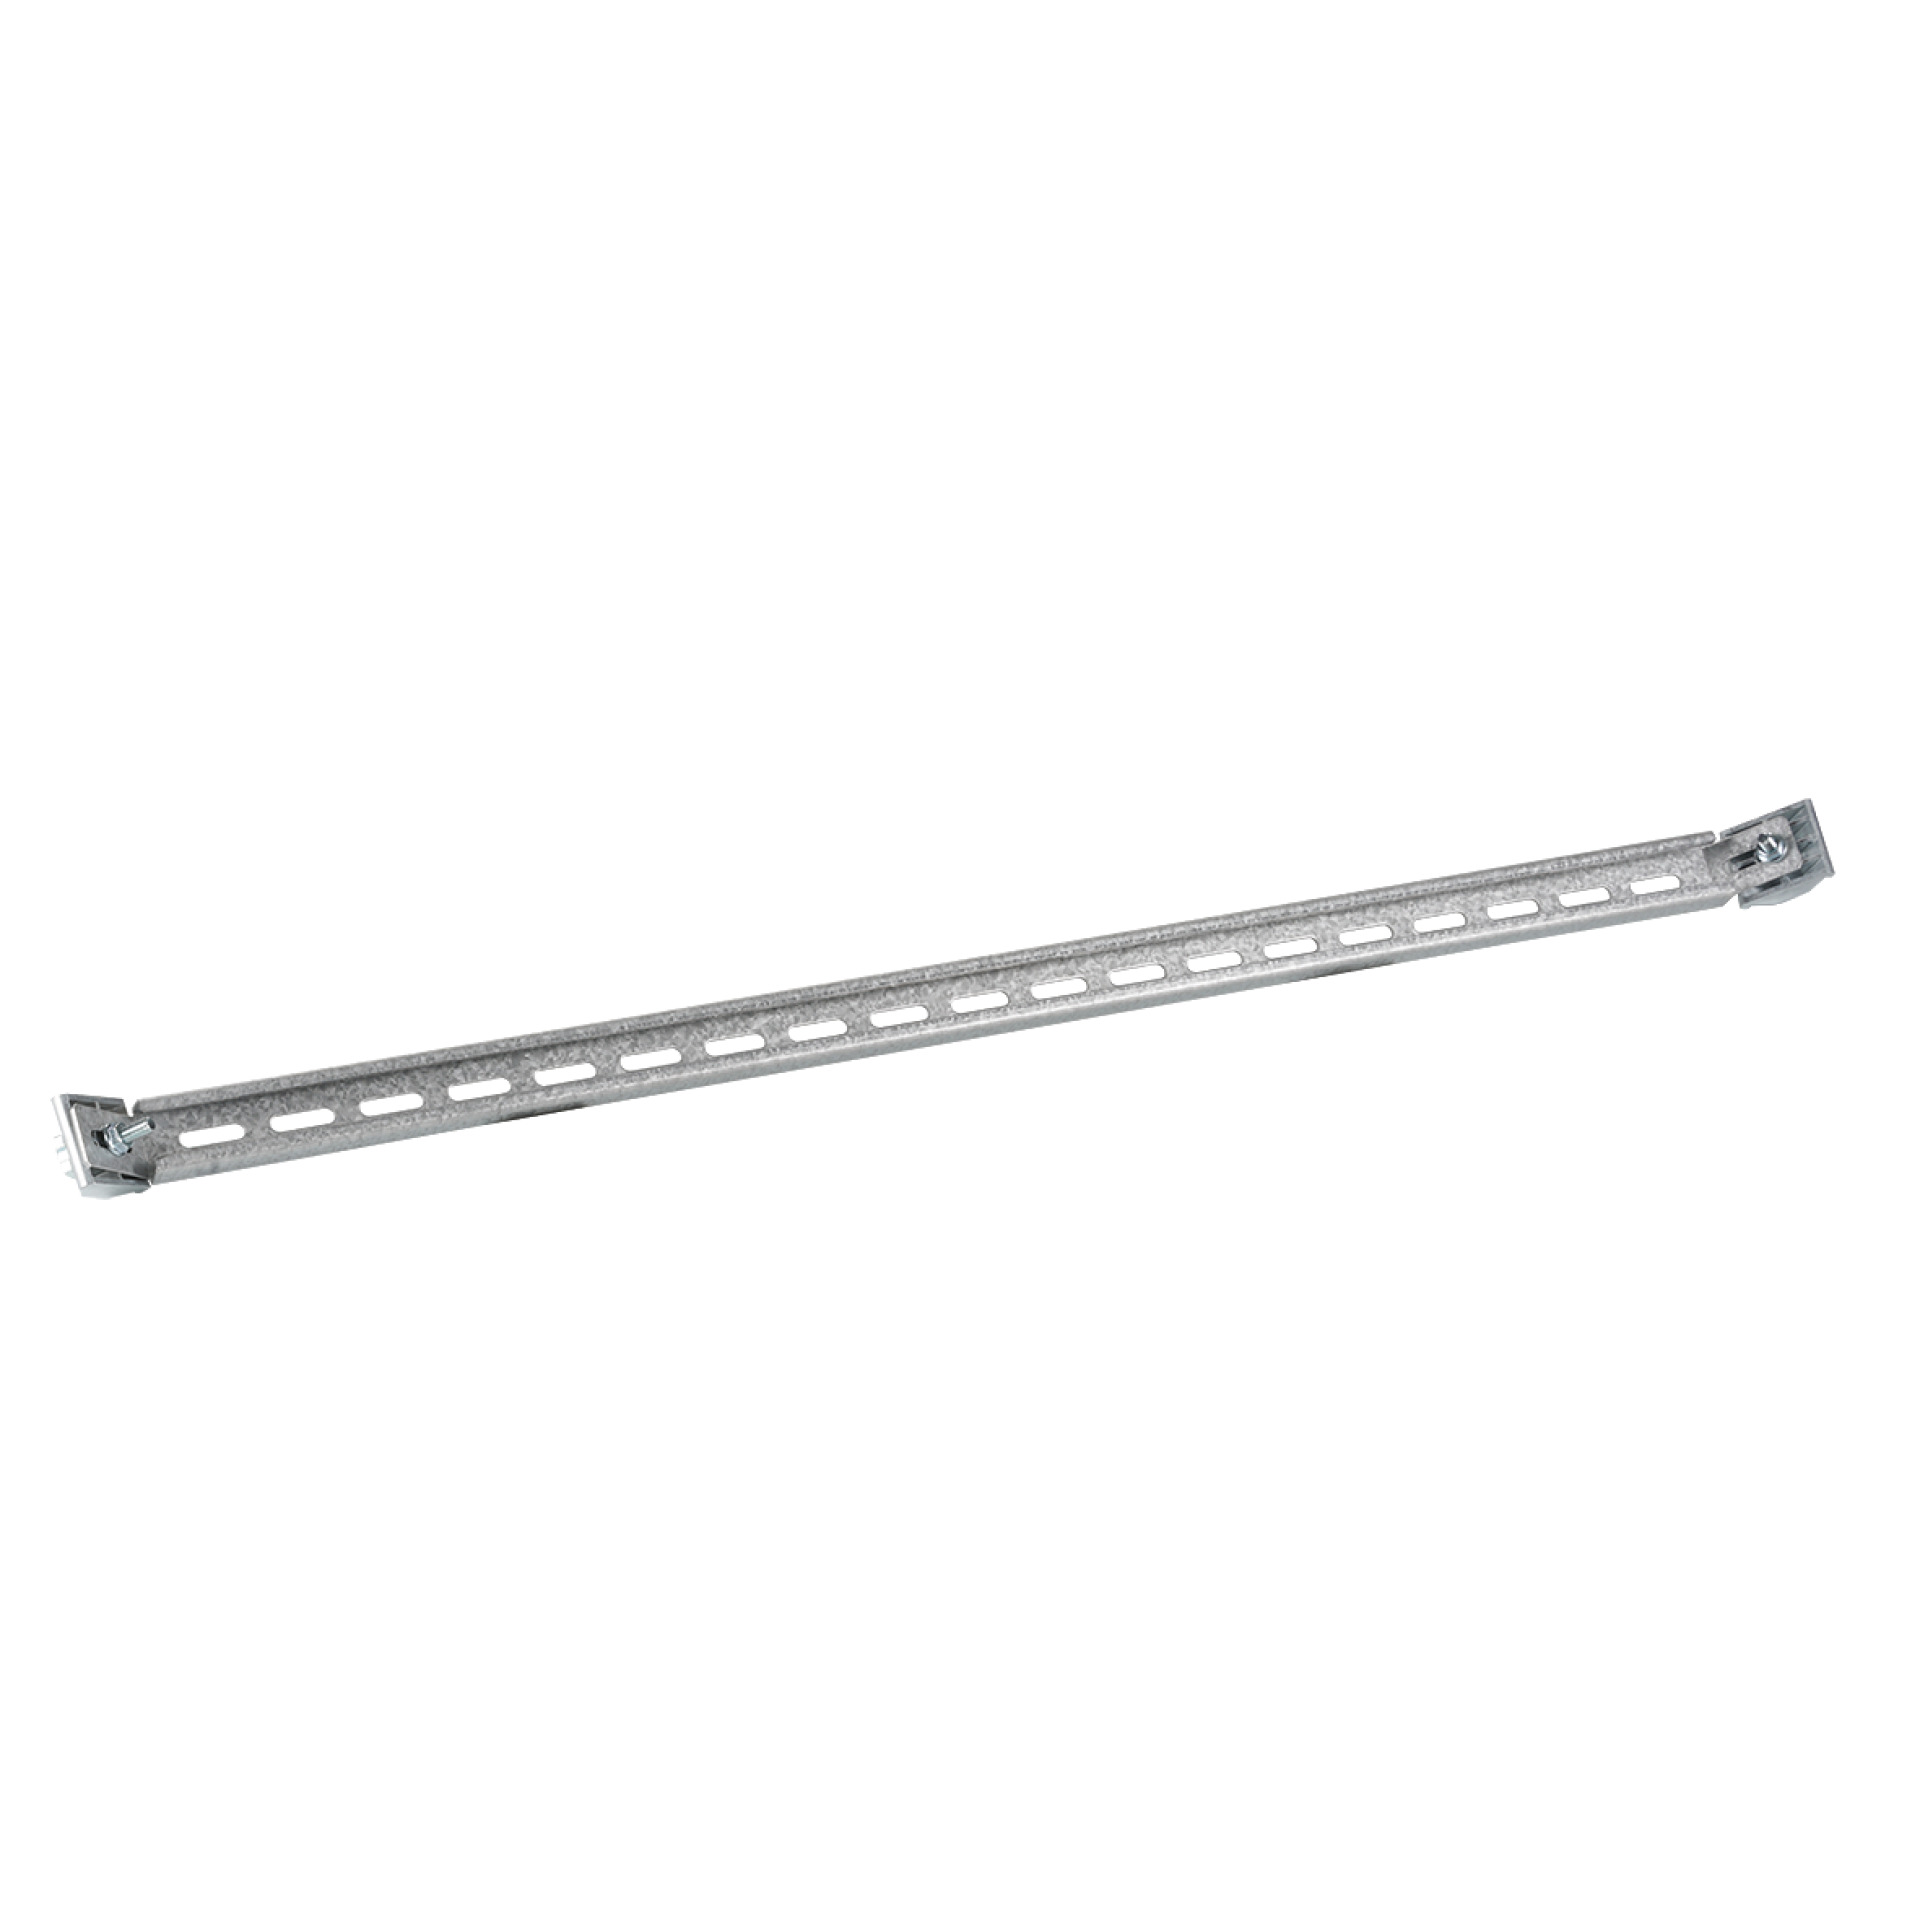 C Profile Rail for Cable Clamping, D=1200 mm